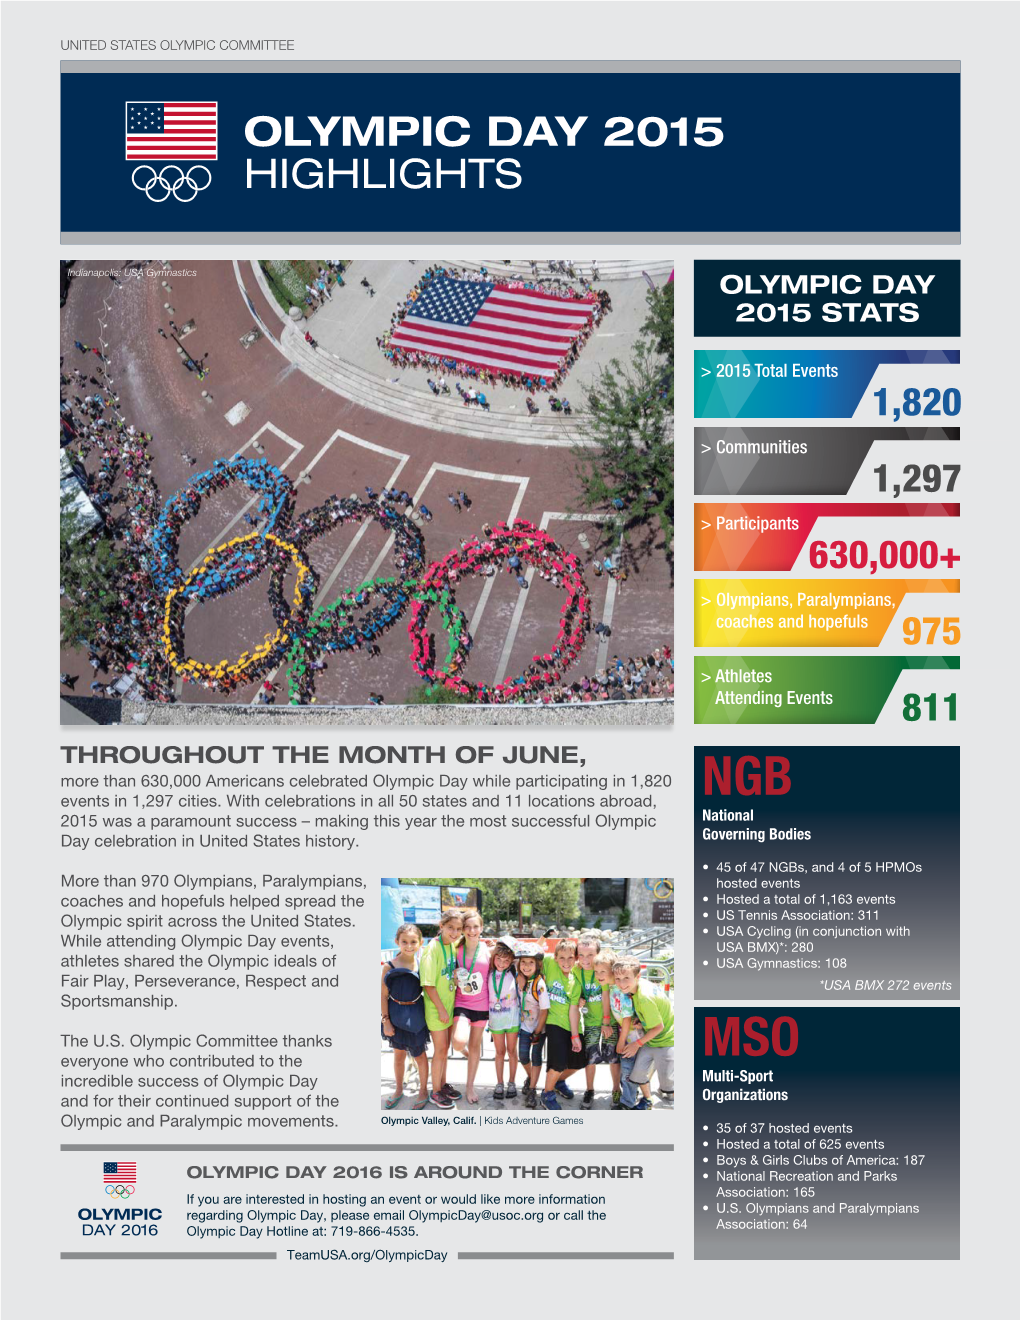 NGB 2015 Was a Paramount Success – Making This Year the Most Successful Olympic National Day Celebration in United States History